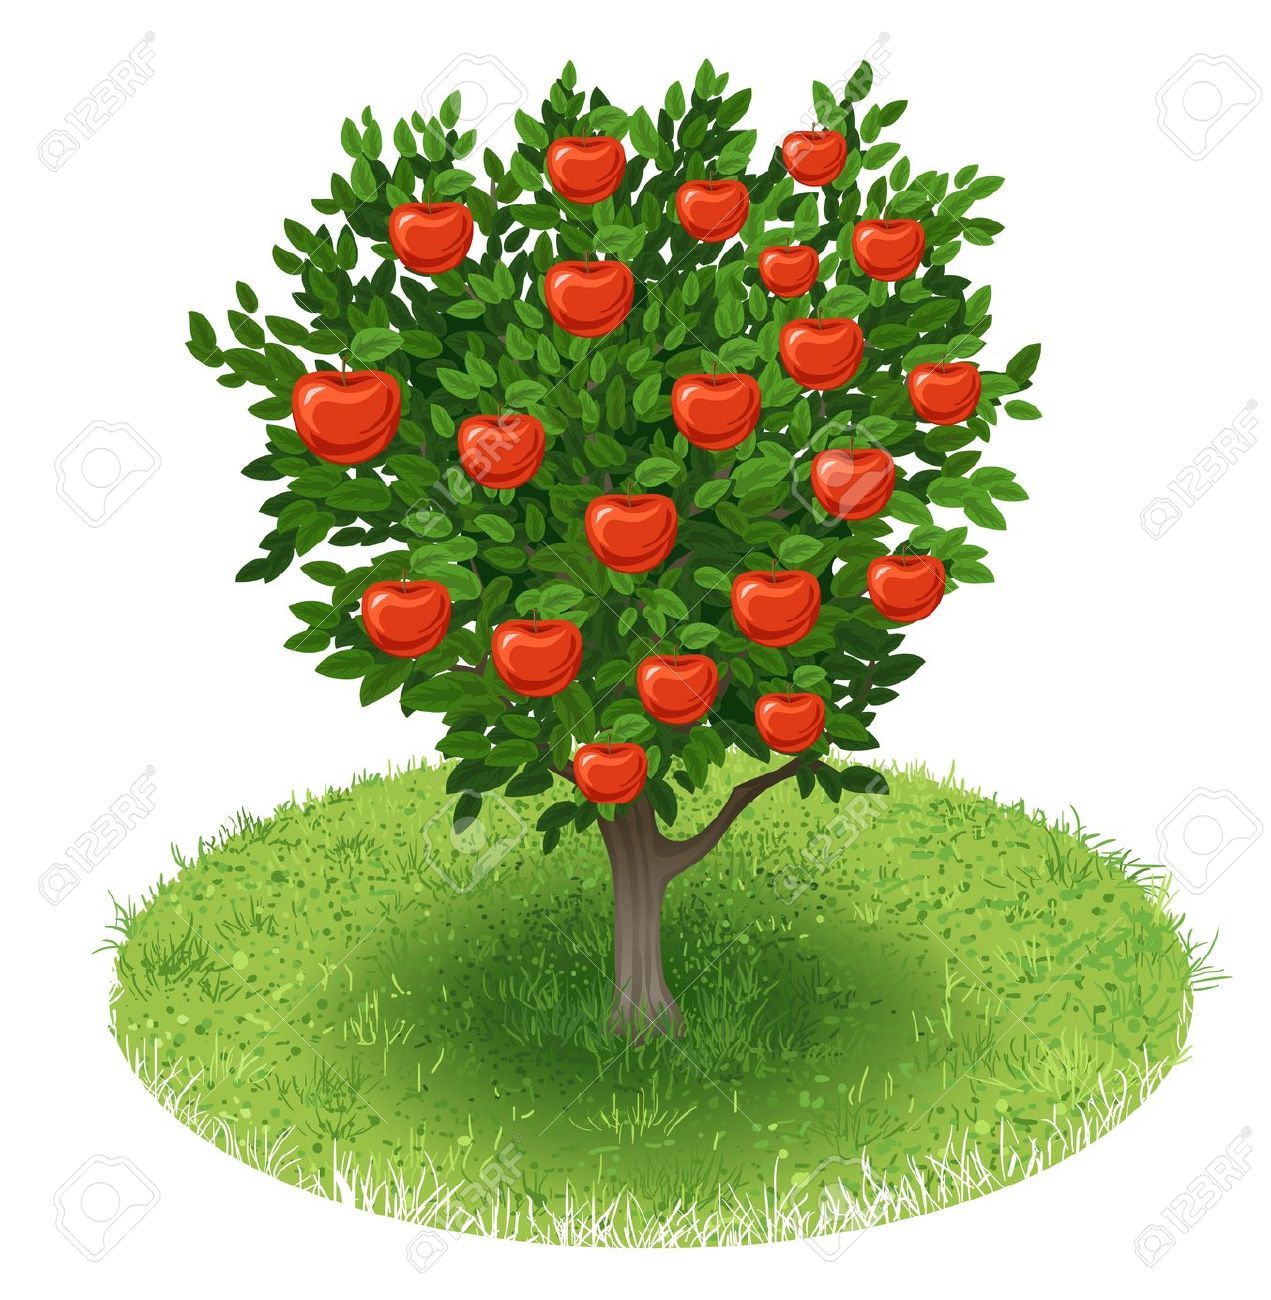 clipart of an apple tree - photo #50